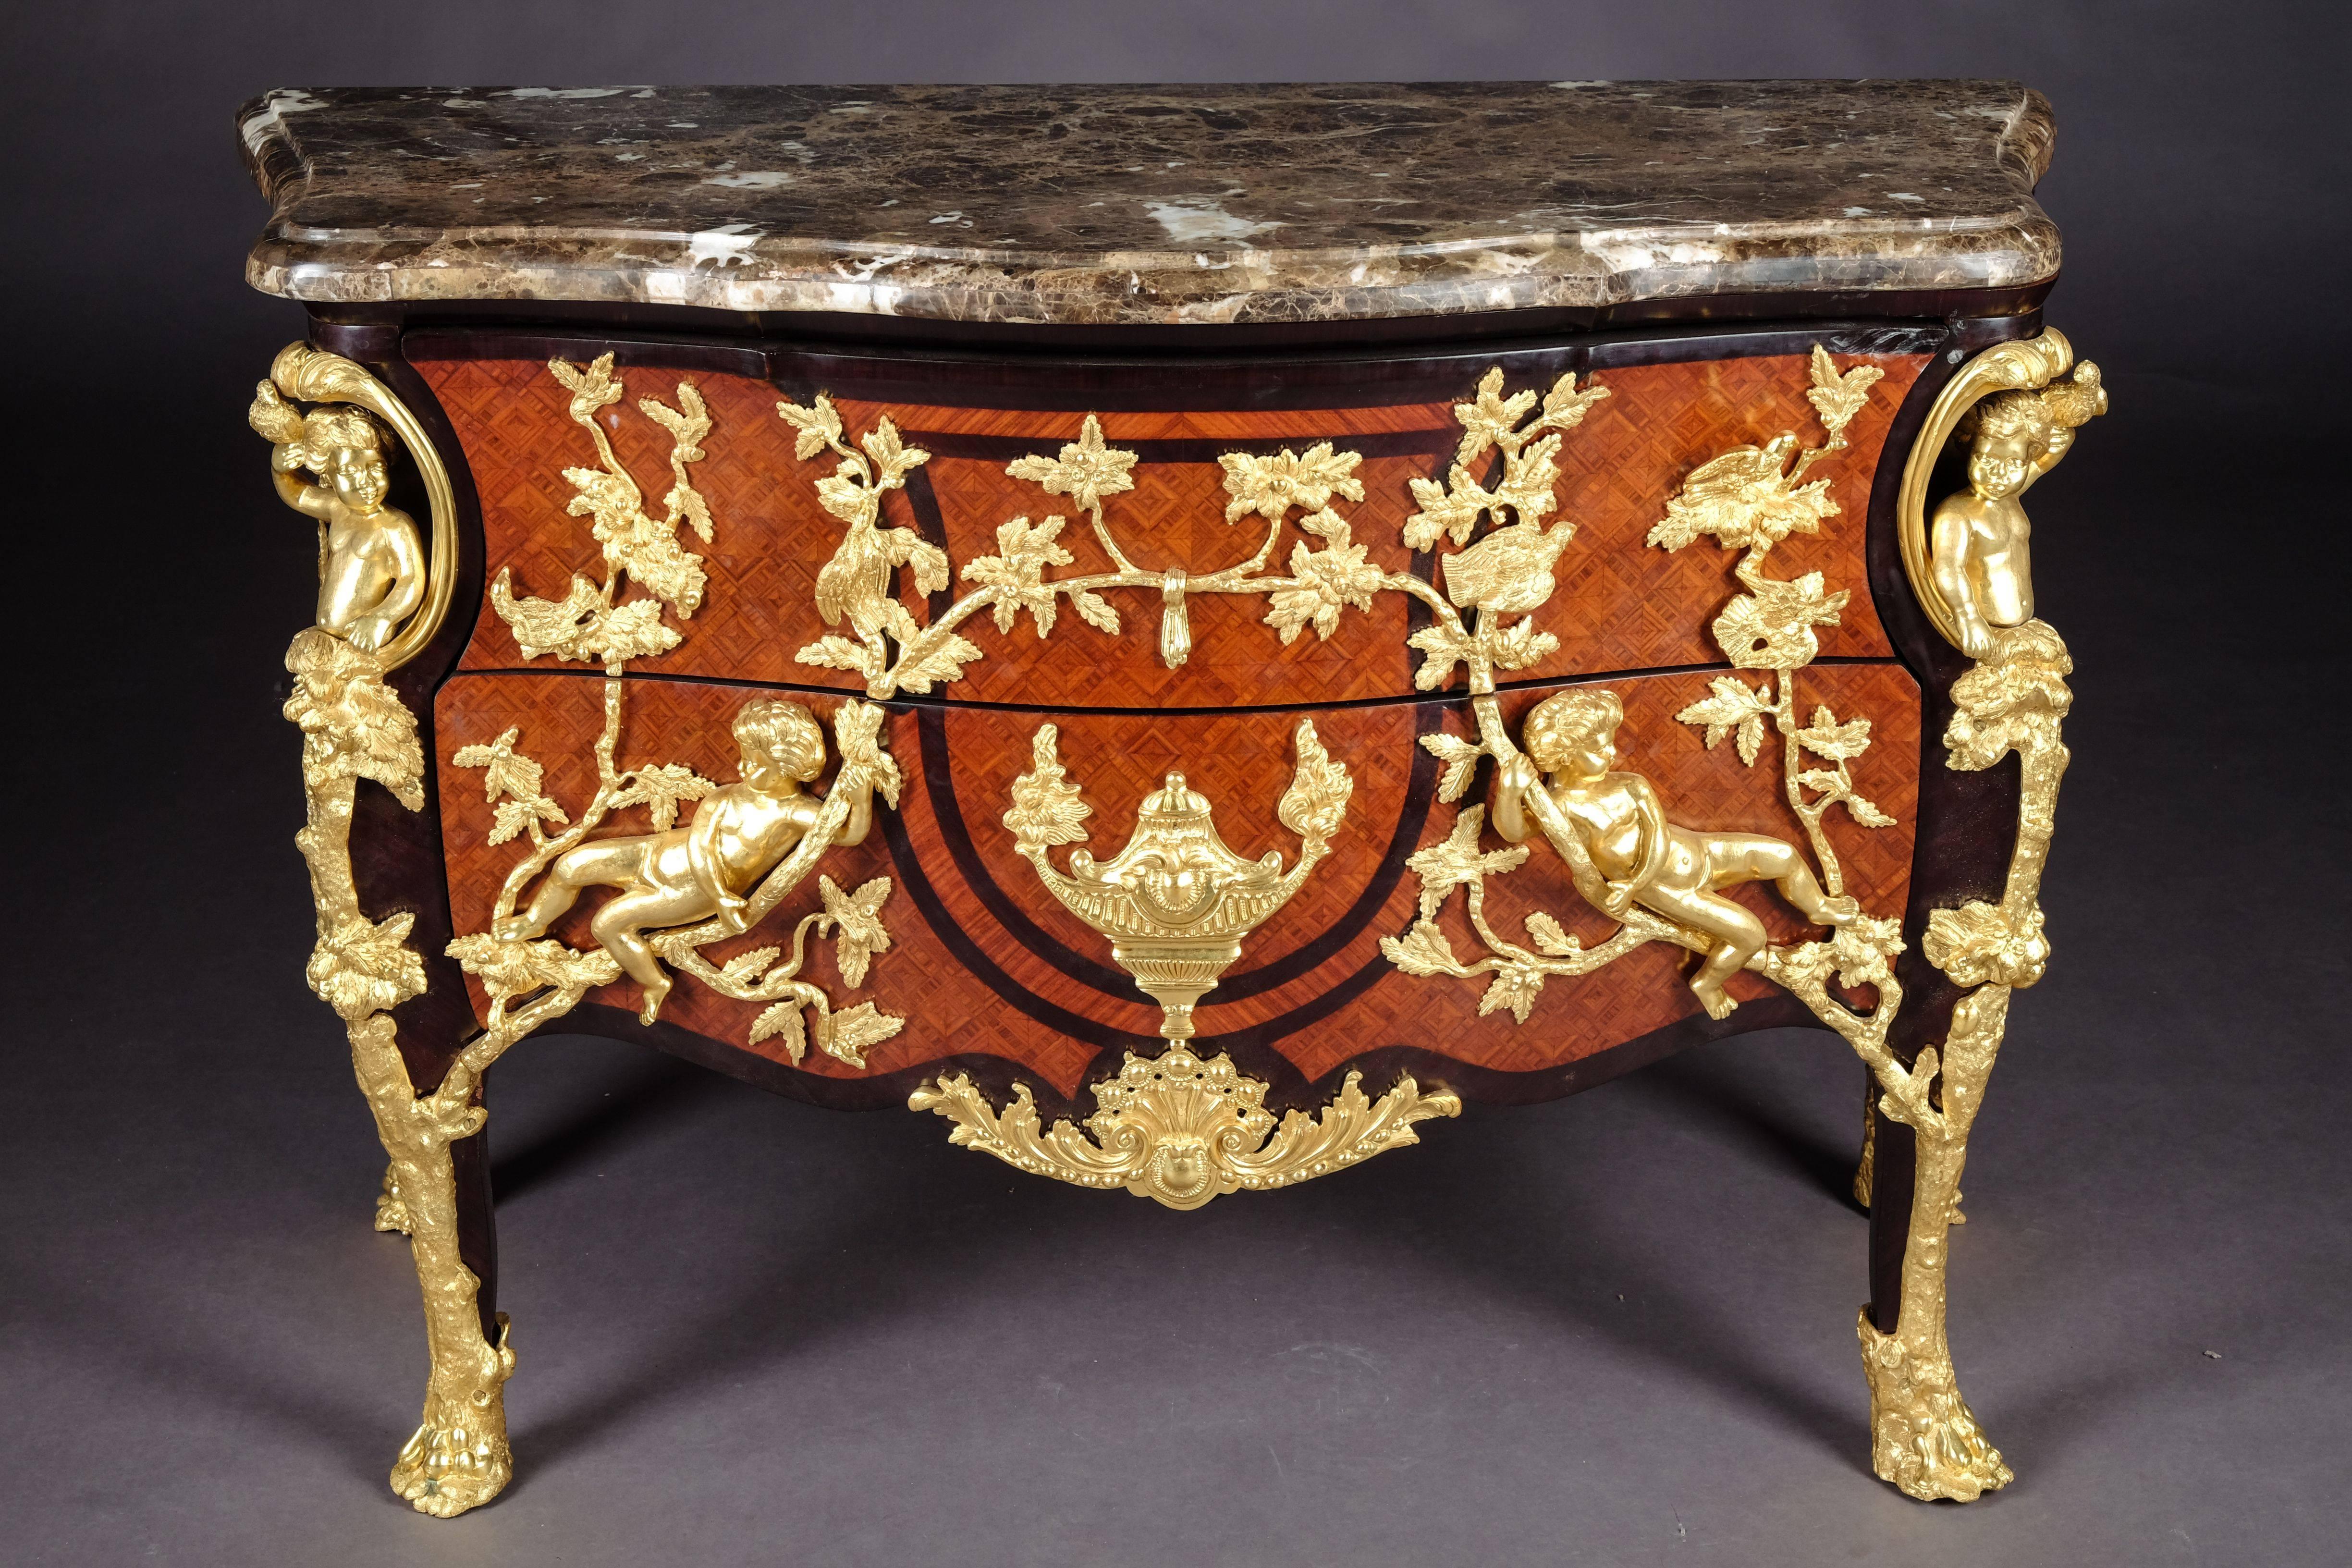 Majestic Commode by model Charles Cressent, 1685-1768, Paris.
 inlaid filling in the form of rhombuses of different precious woods, limited by so-called mirror veneer. On all sides, the cambered body on a deeply draped frame, ending over high loops